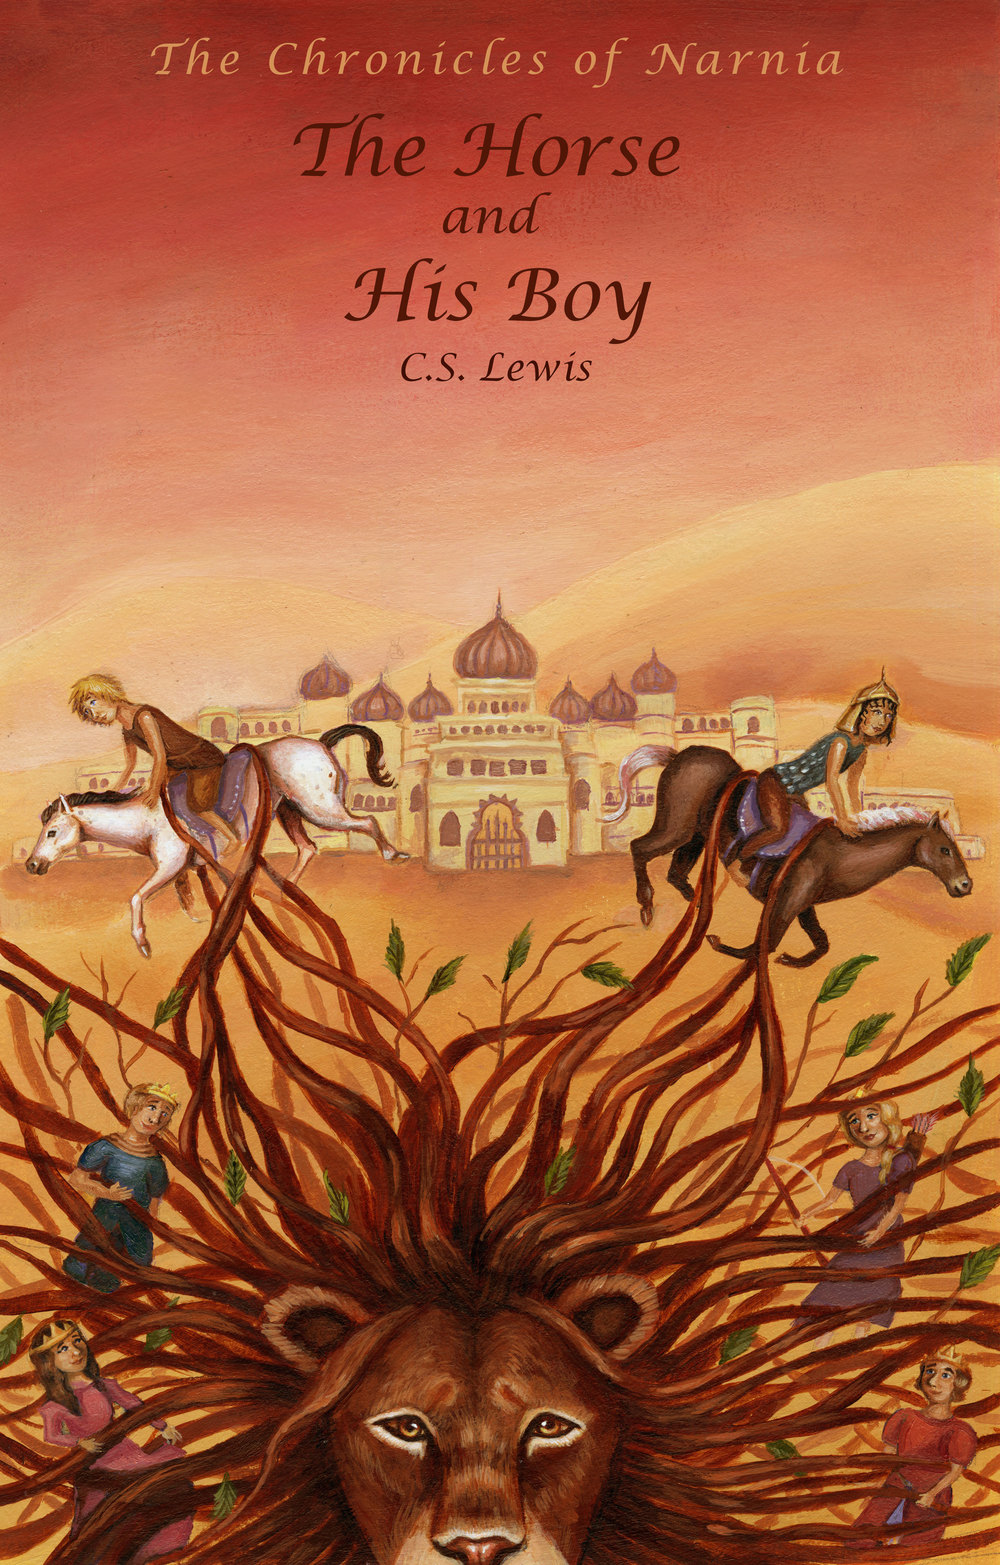 The horse and his boy book cover